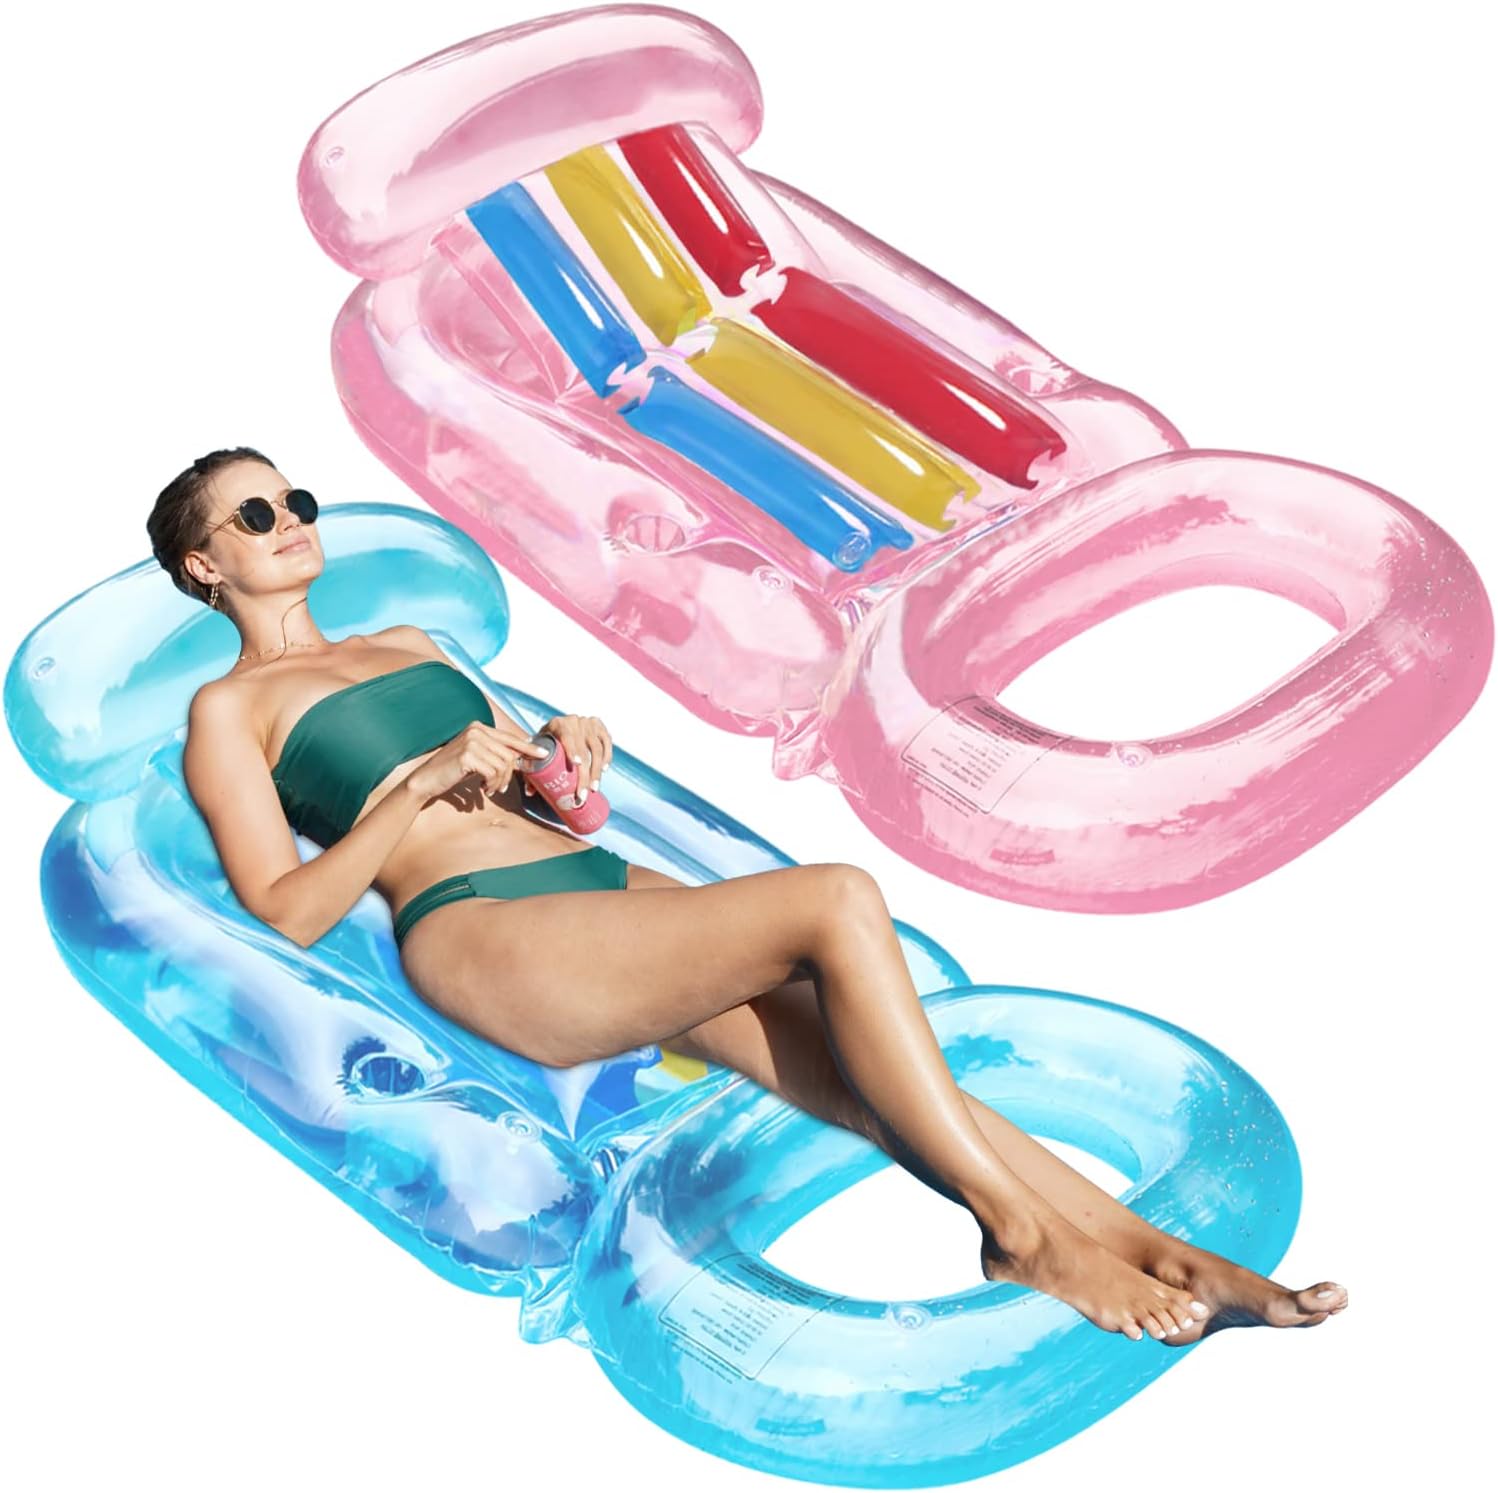 FindUWill Inflatable Pool Floats Lounger Review